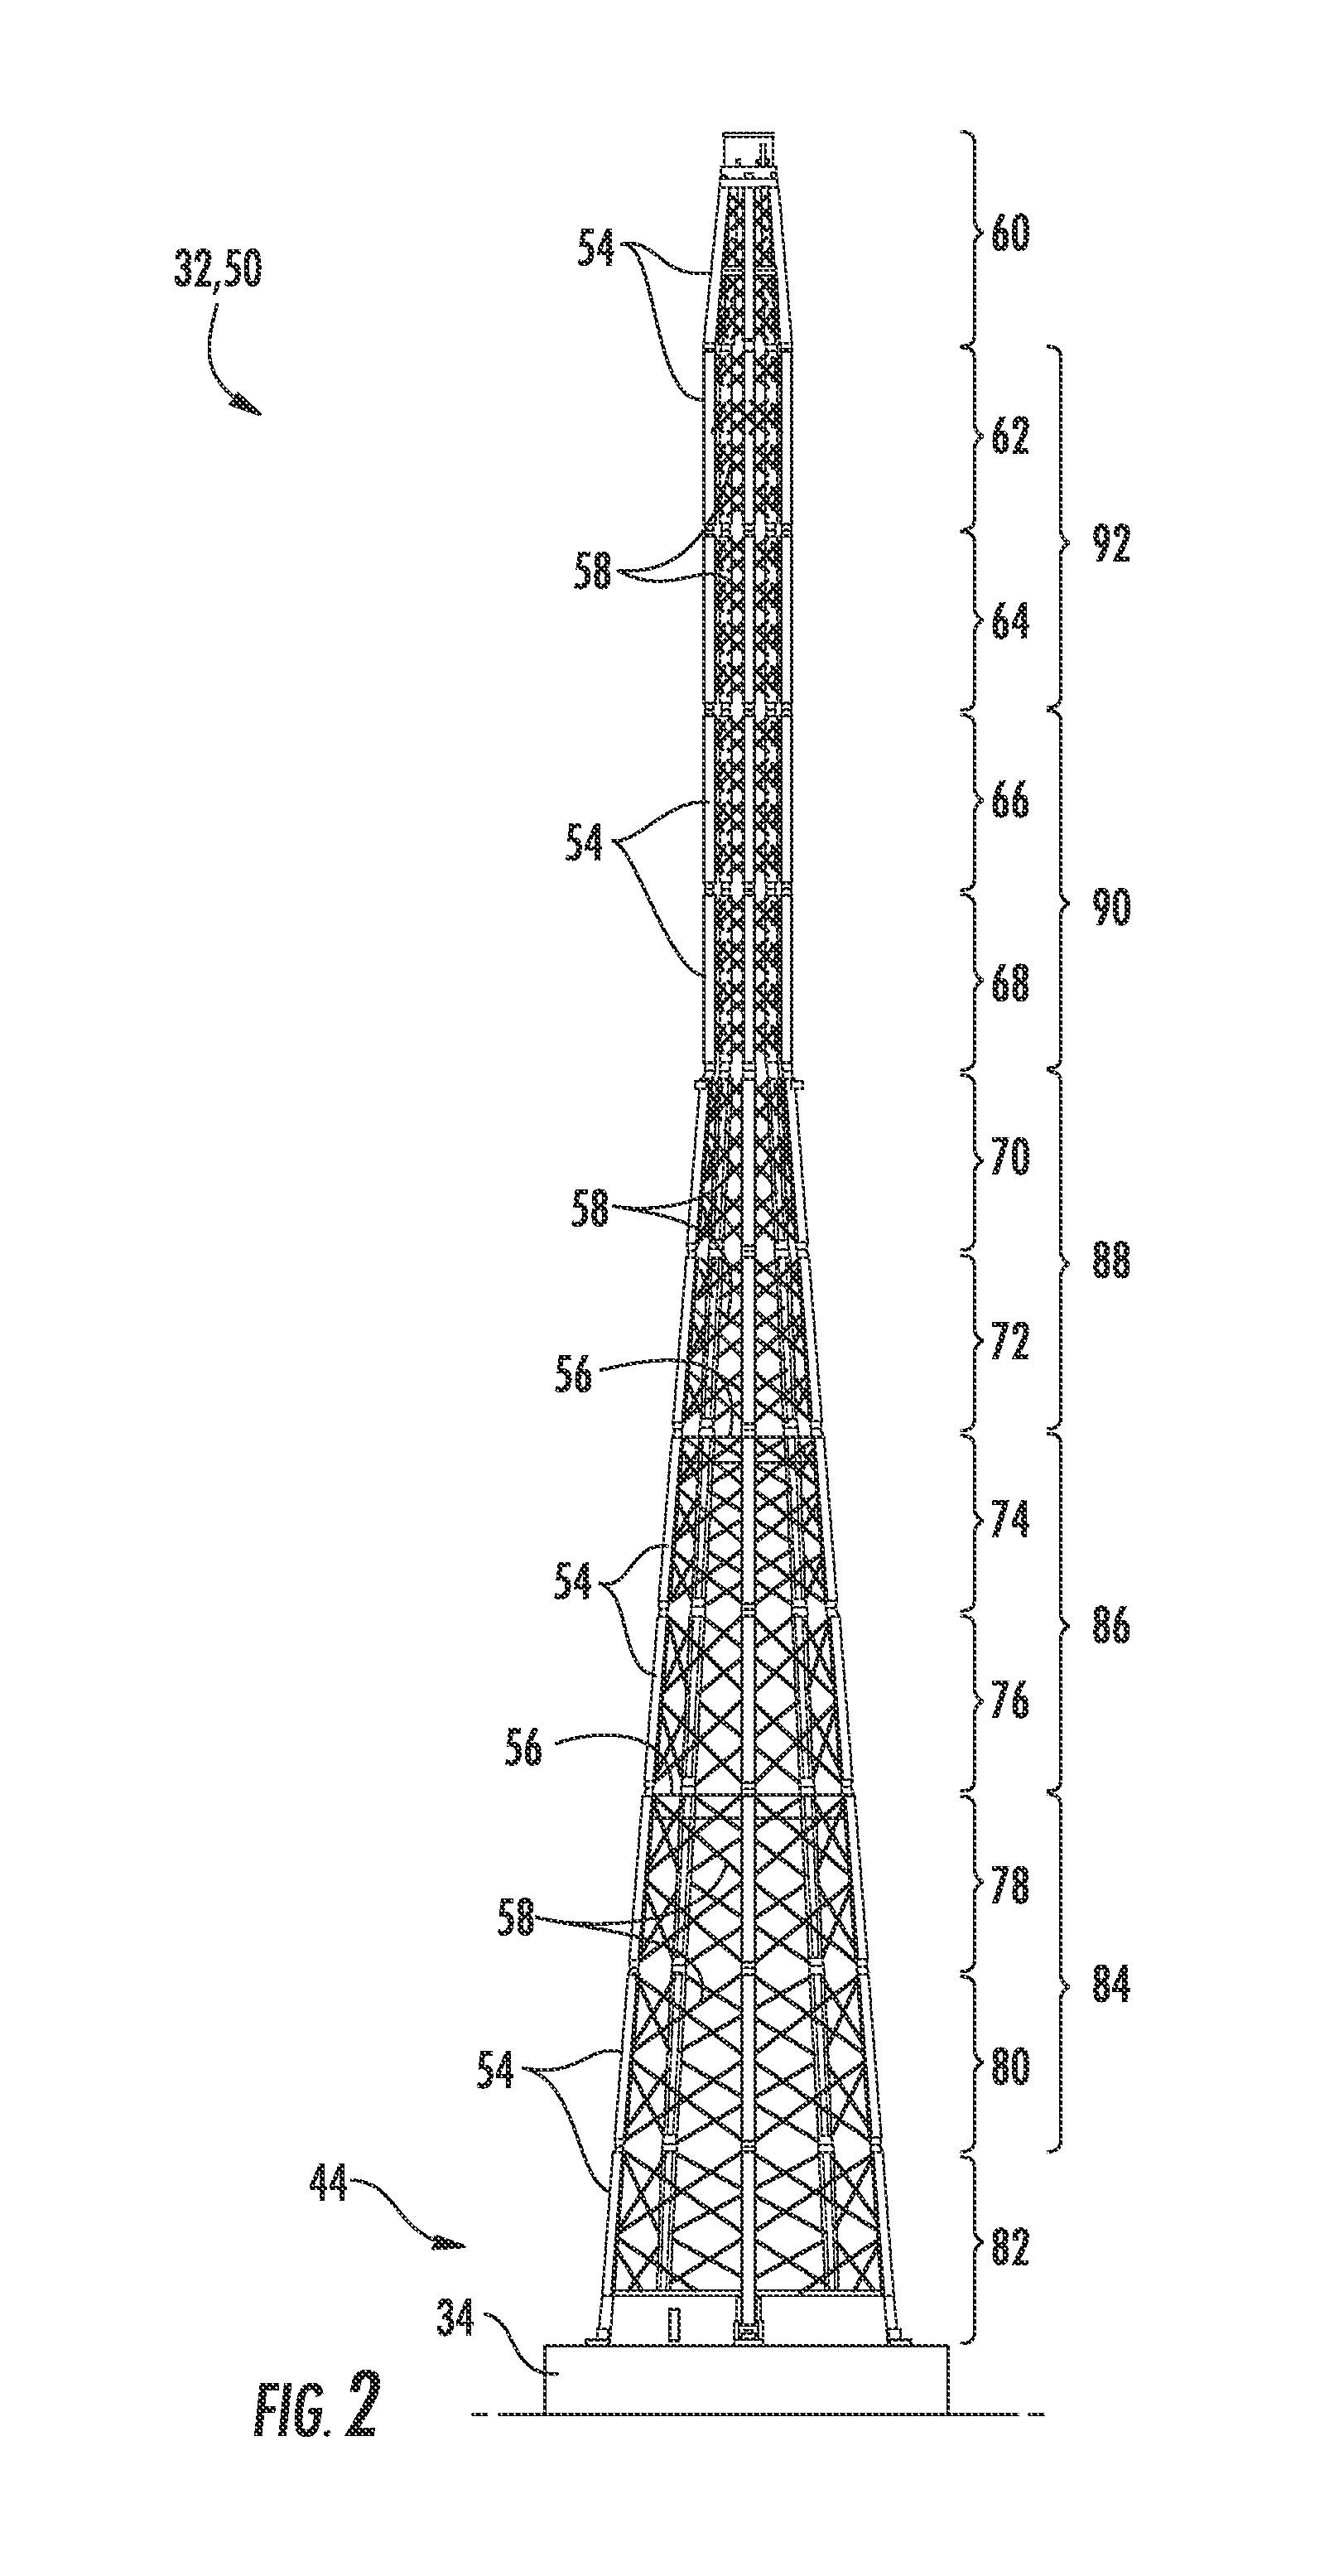 System and method for assembling tower sections of a wind turbine lattice tower structure